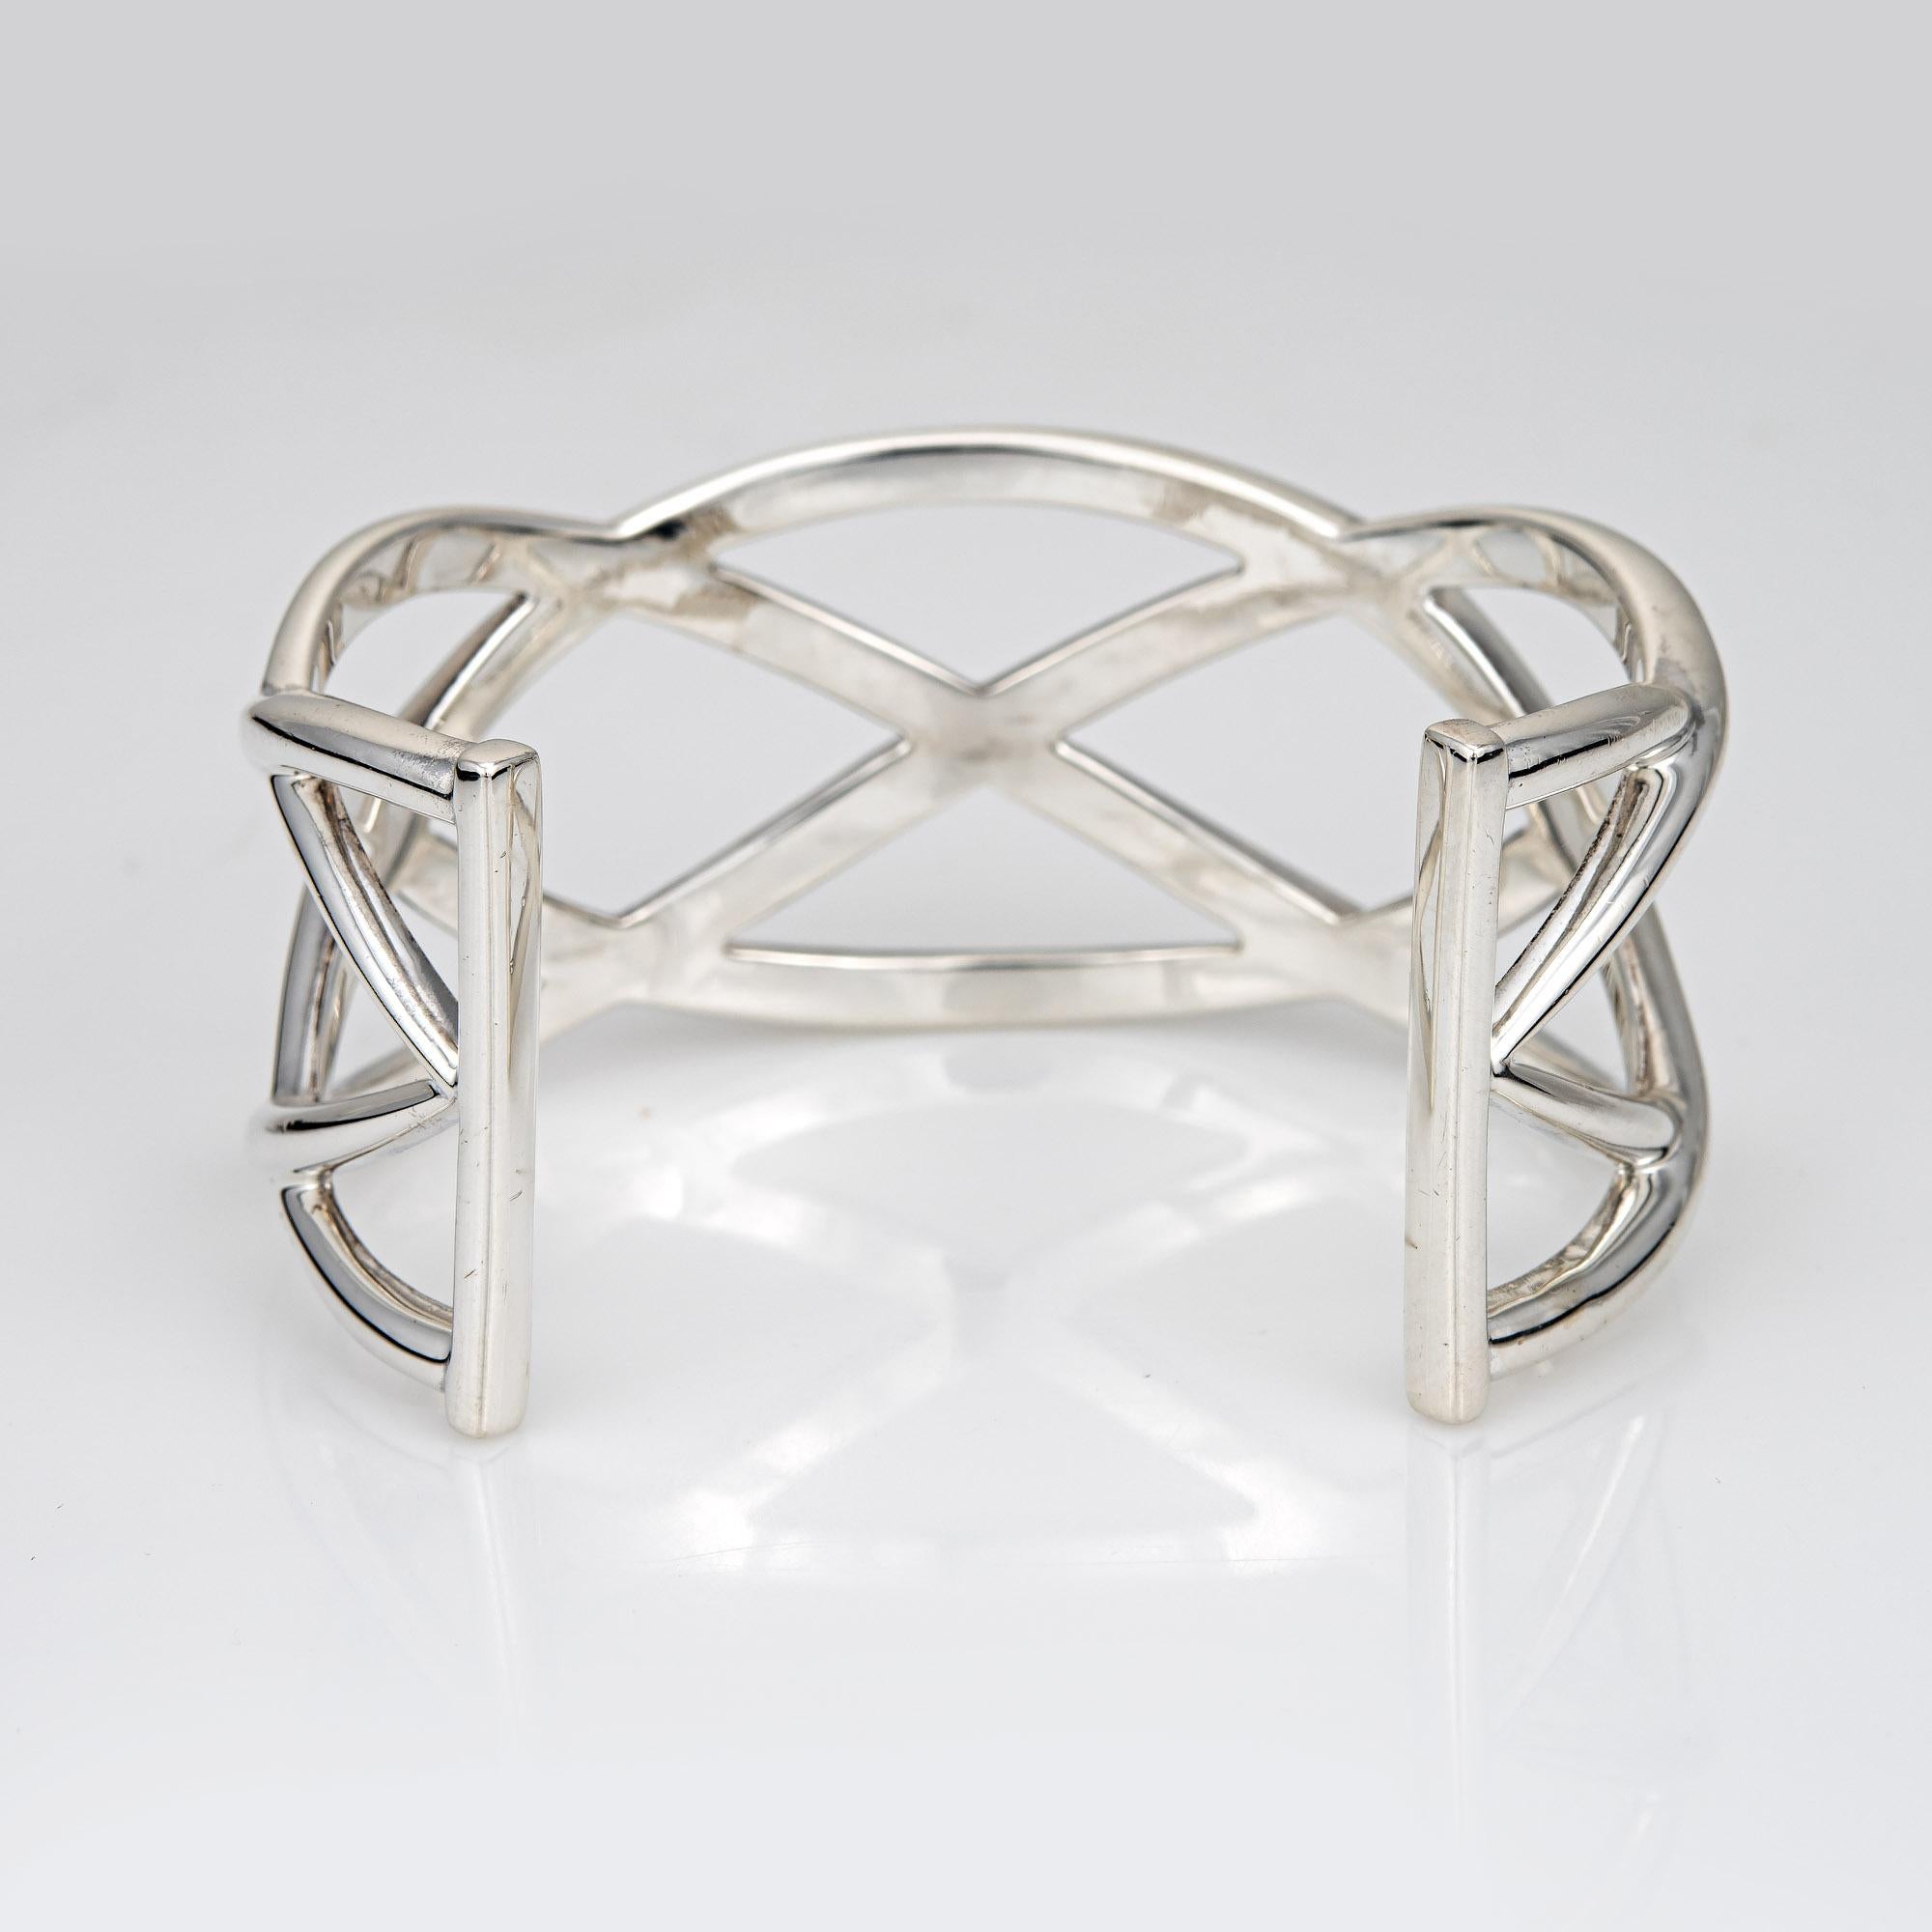 Stylish and finely detailed vintage Tiffany & Co cuff bracelet, crafted in sterling silver.  

The woven cuff bracelet is wide (28mm - 1.10 inches) and makes a great statement on the wrist. The bracelet is designed to fit a wrist up to 6 1/2 inches